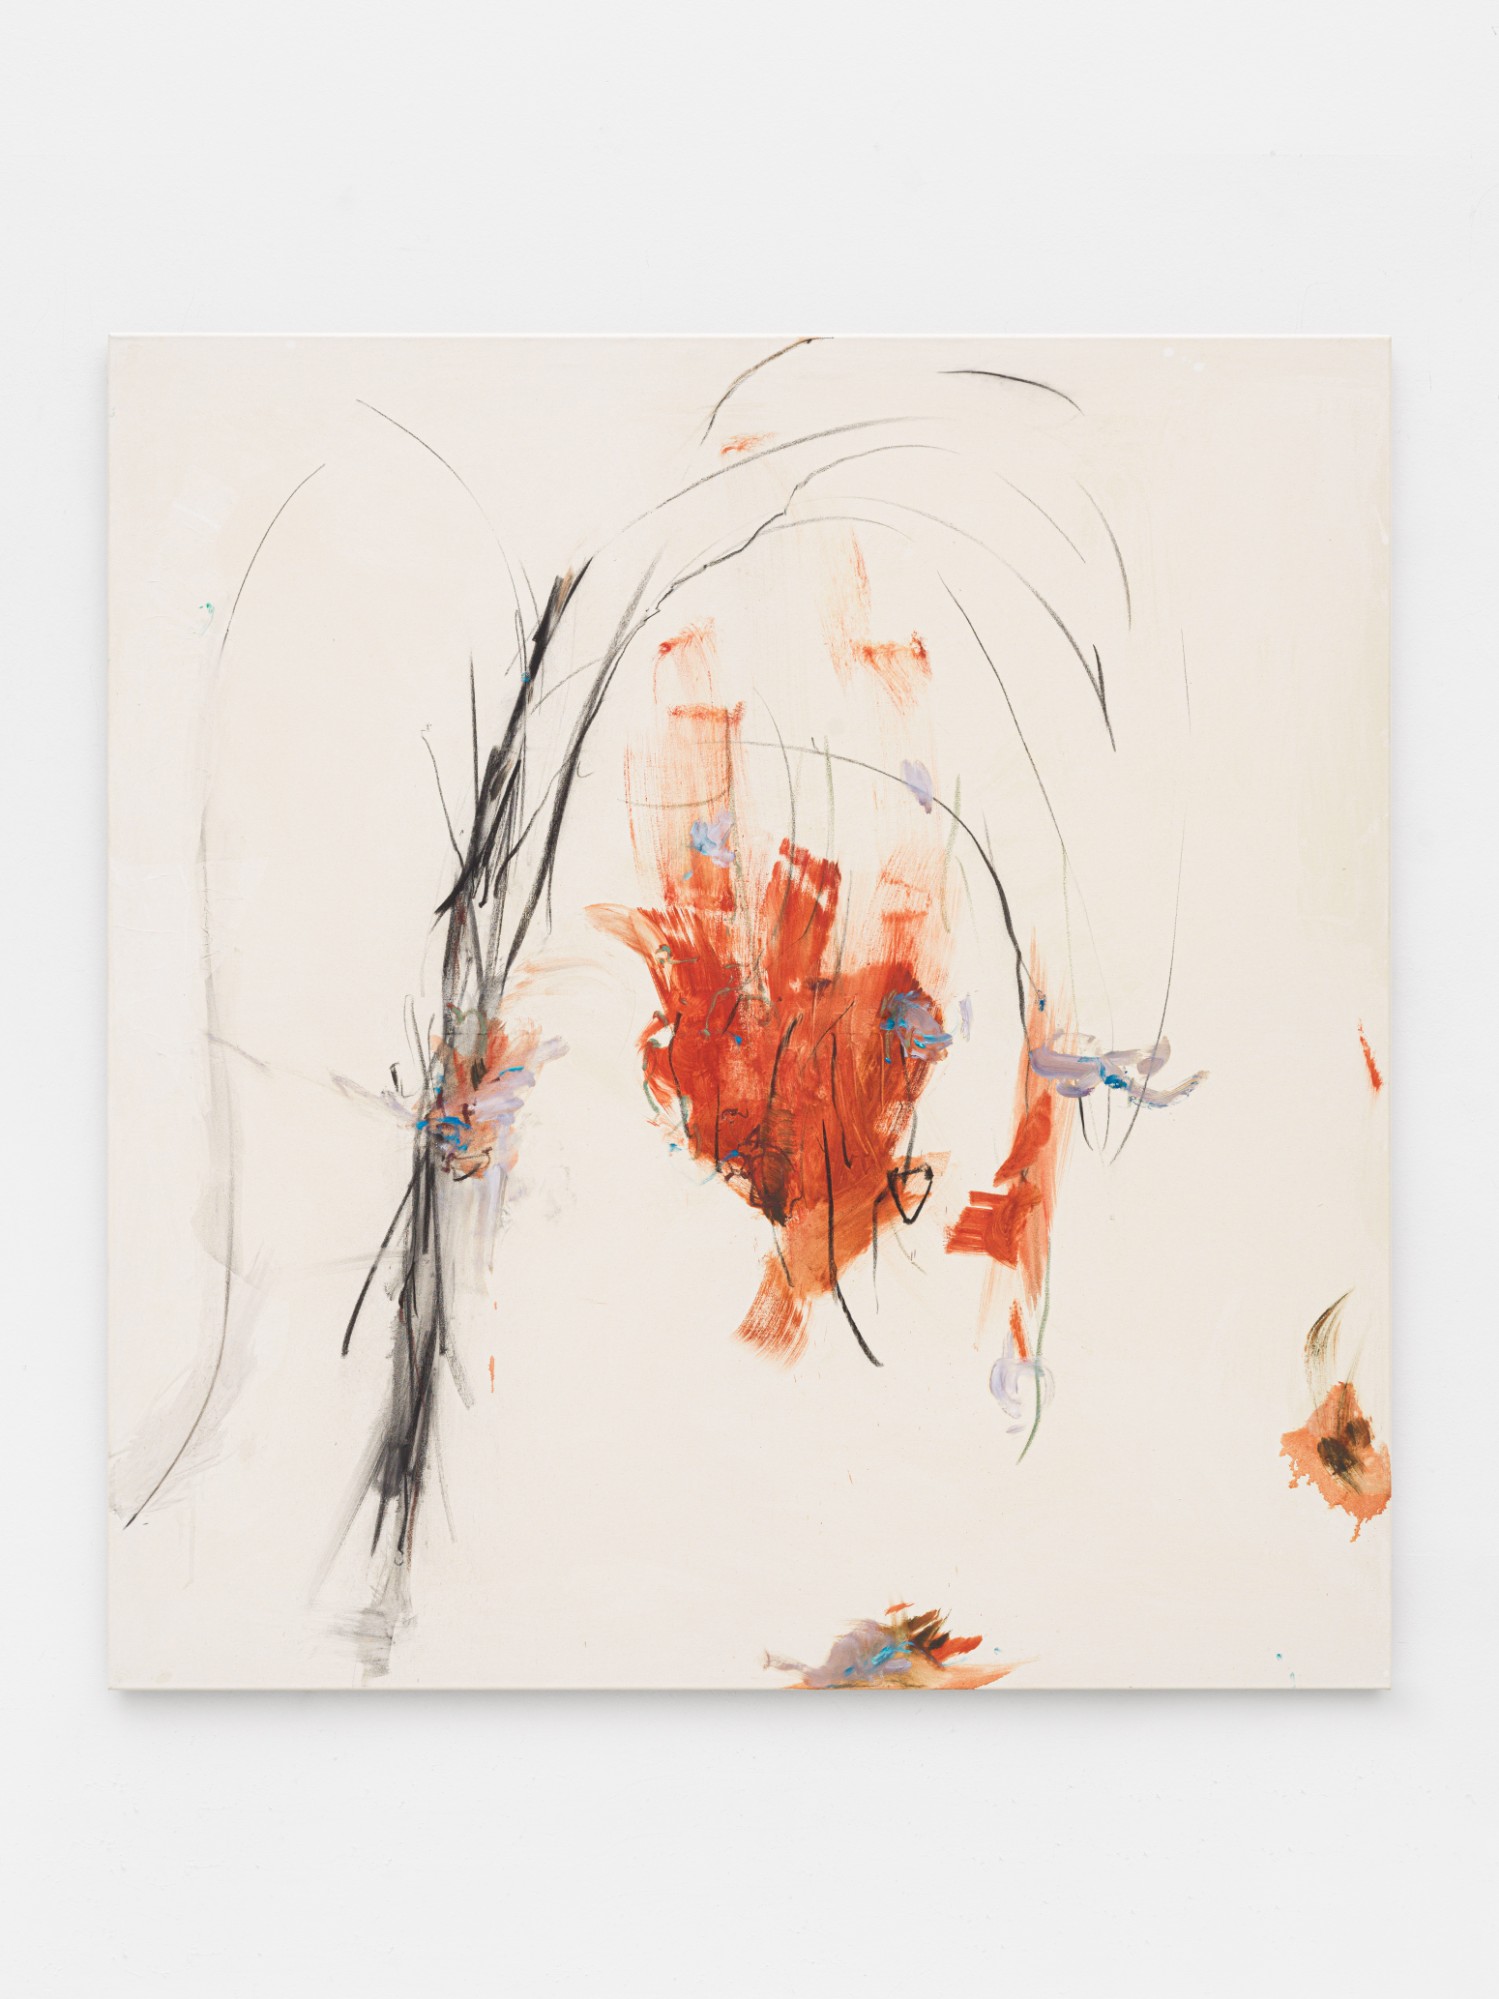 Hinako Miyabayashi, Cranberry's Heartbeat, 2023, oil and paper (tissue paper), on canvas, 190 x 180 cm